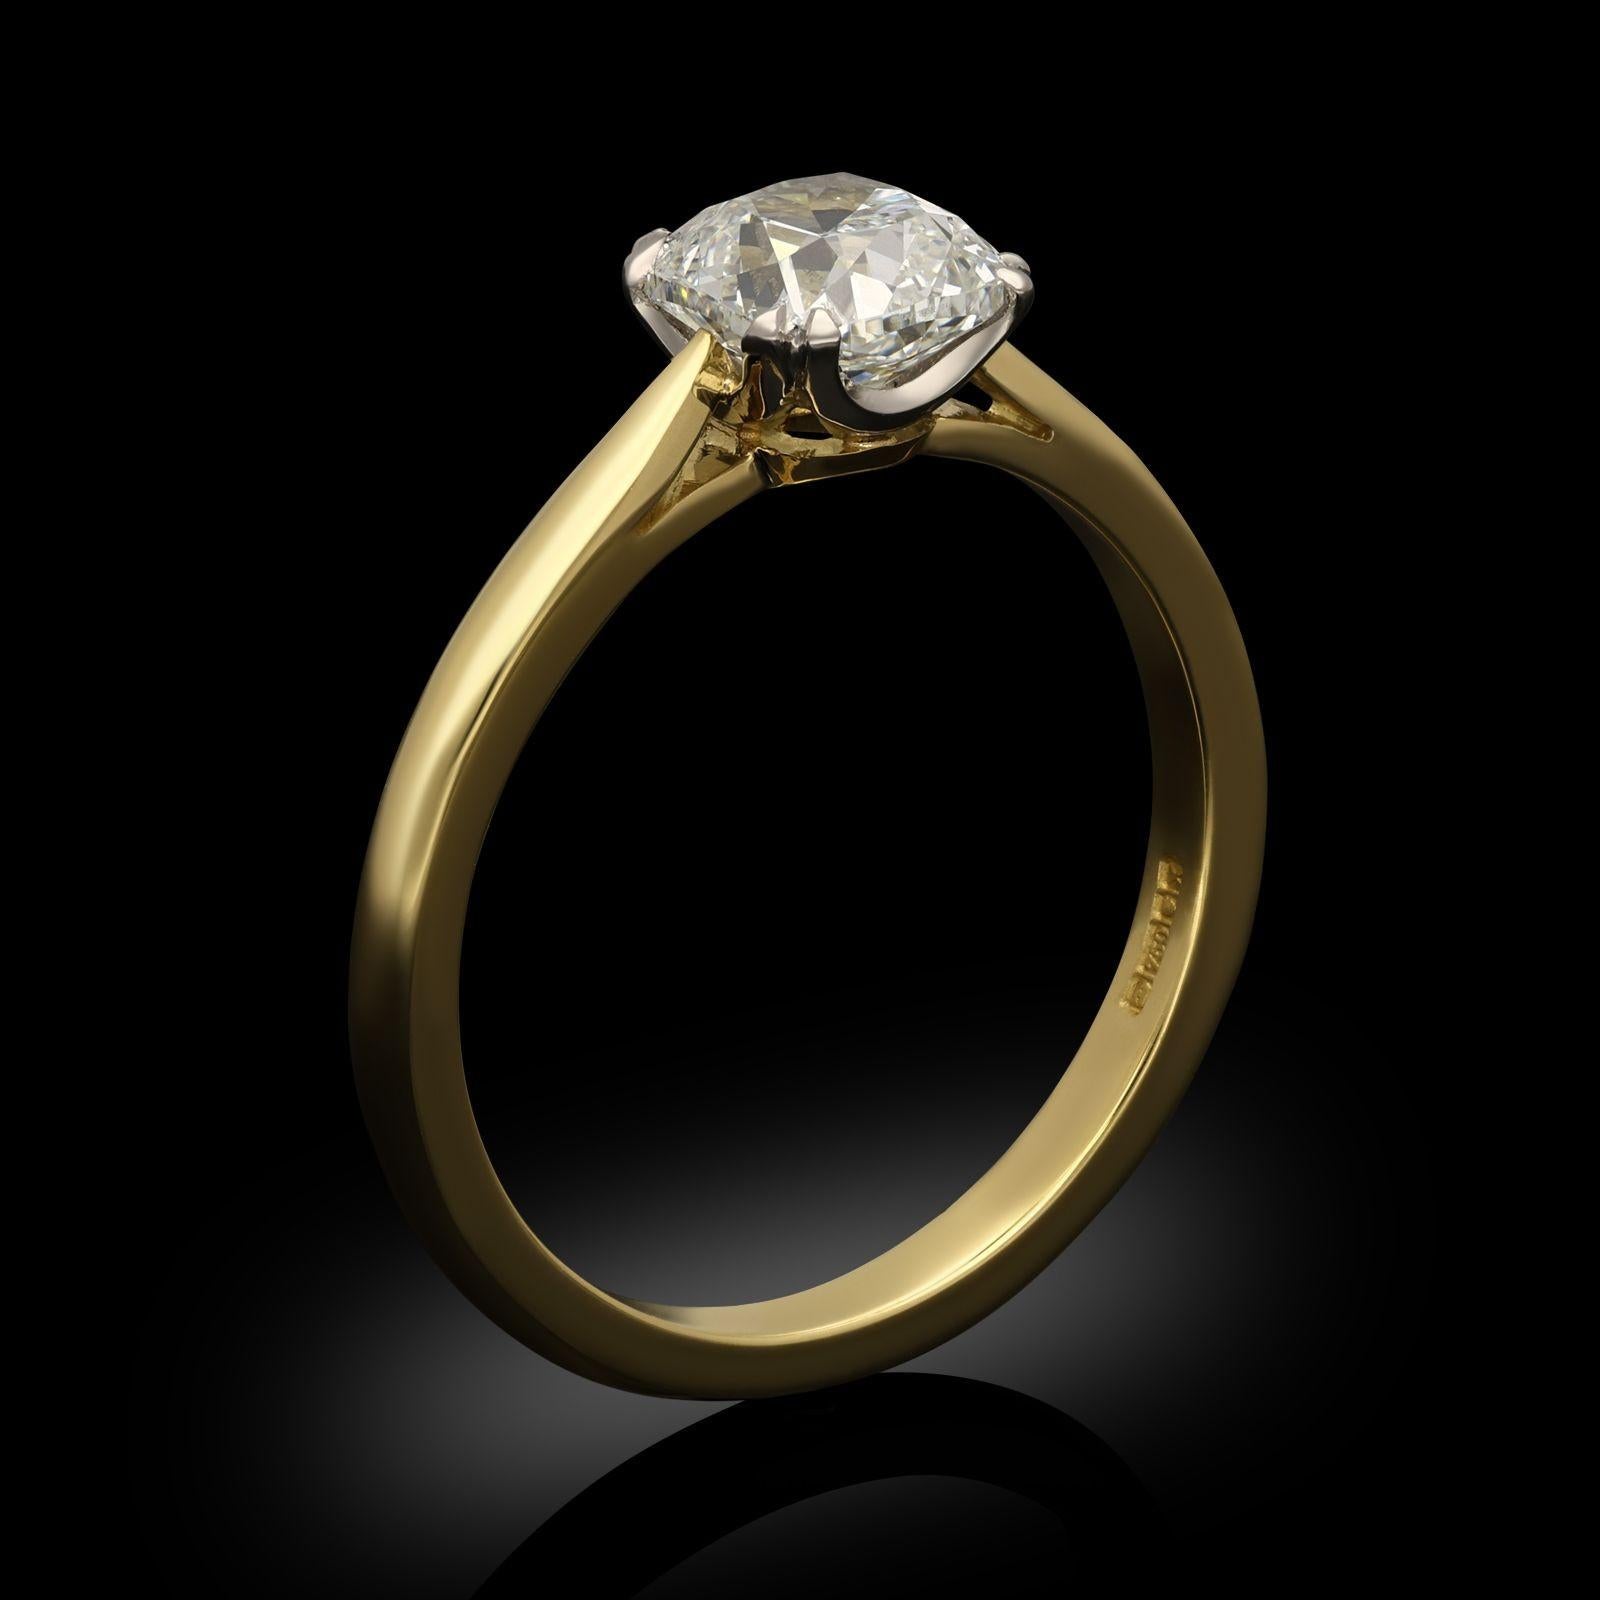 Hancocks 1.12ct Old Mine Cushion Cut Diamond And 18ct Yellow Gold Solitaire Ring In New Condition For Sale In London, GB